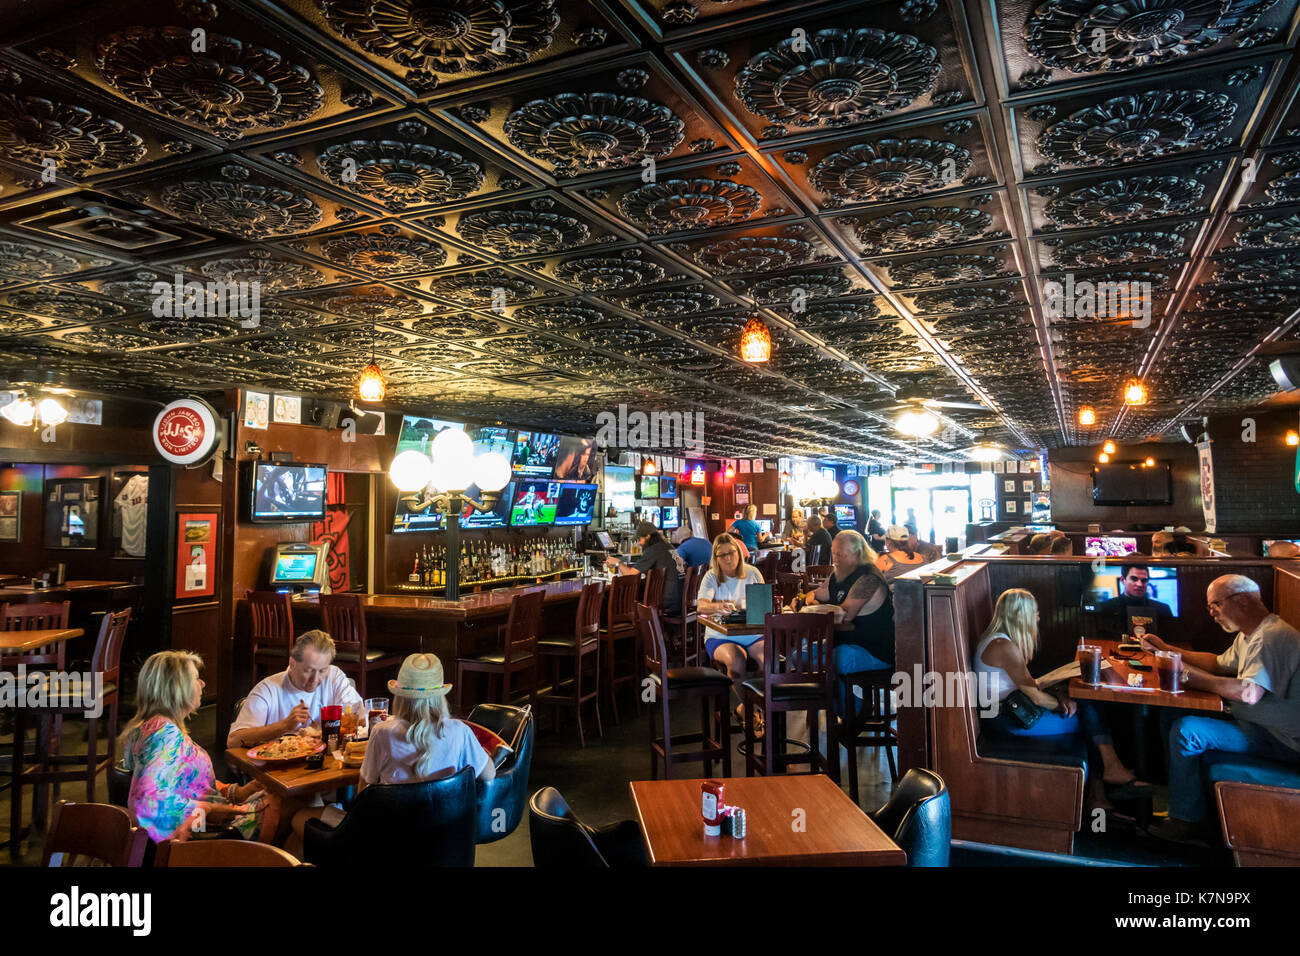 Myrtle Beach South Carolina,Dagwood's Deli & Sports Bar,restaurant restaurants food dining eating out cafe cafes bistro,casual dining,tin metal tiles, Stock Photo